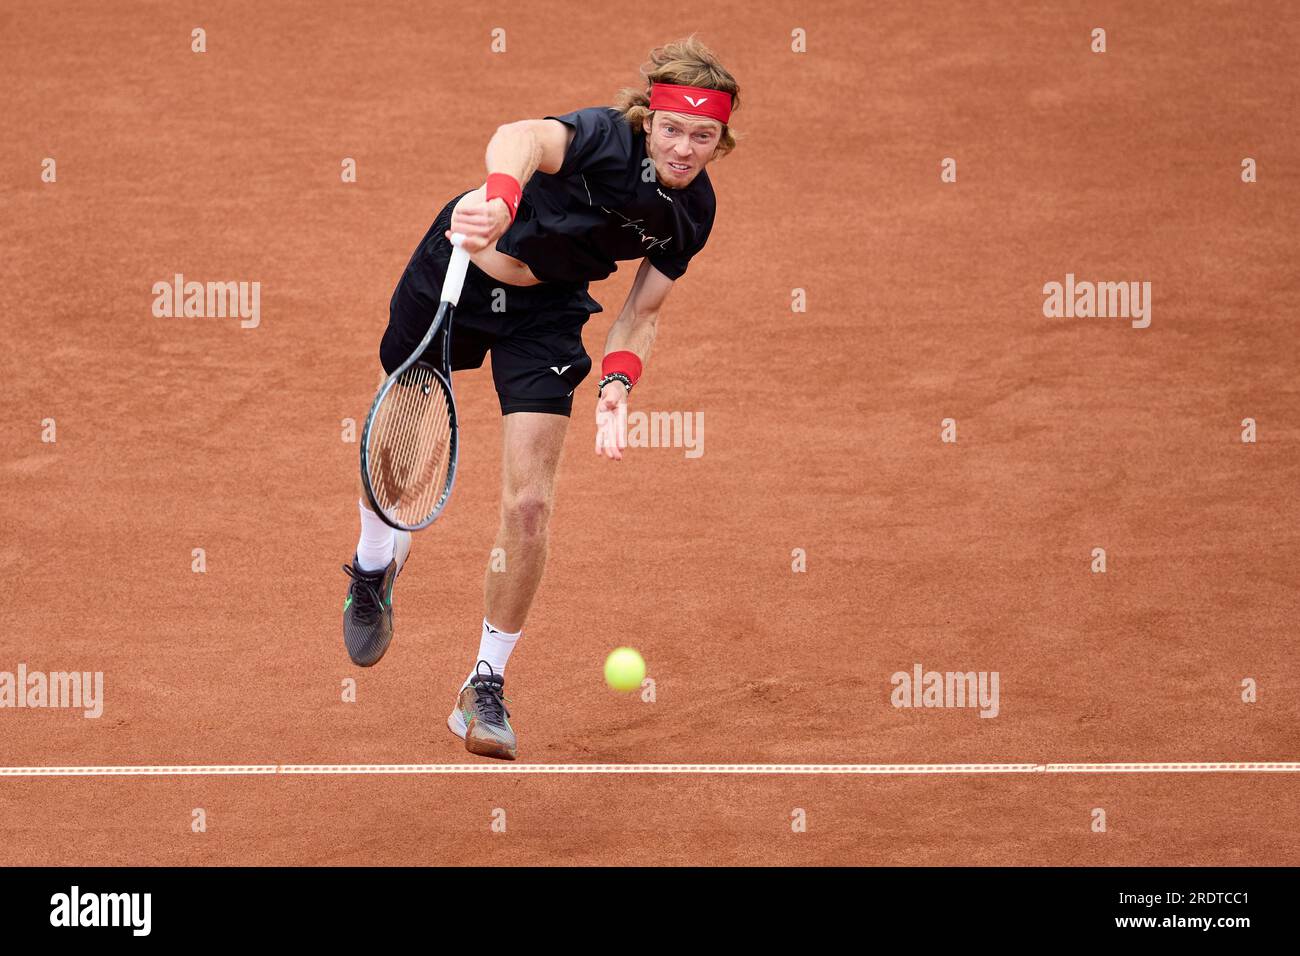 BÅSTAD 20230723 Andrey Rublev, Russia, in the final against Casper Ruud, Norway, during the Swedish Open, the ATP tournament in Båstad, Sweden, on Sunday, July 23, 2023